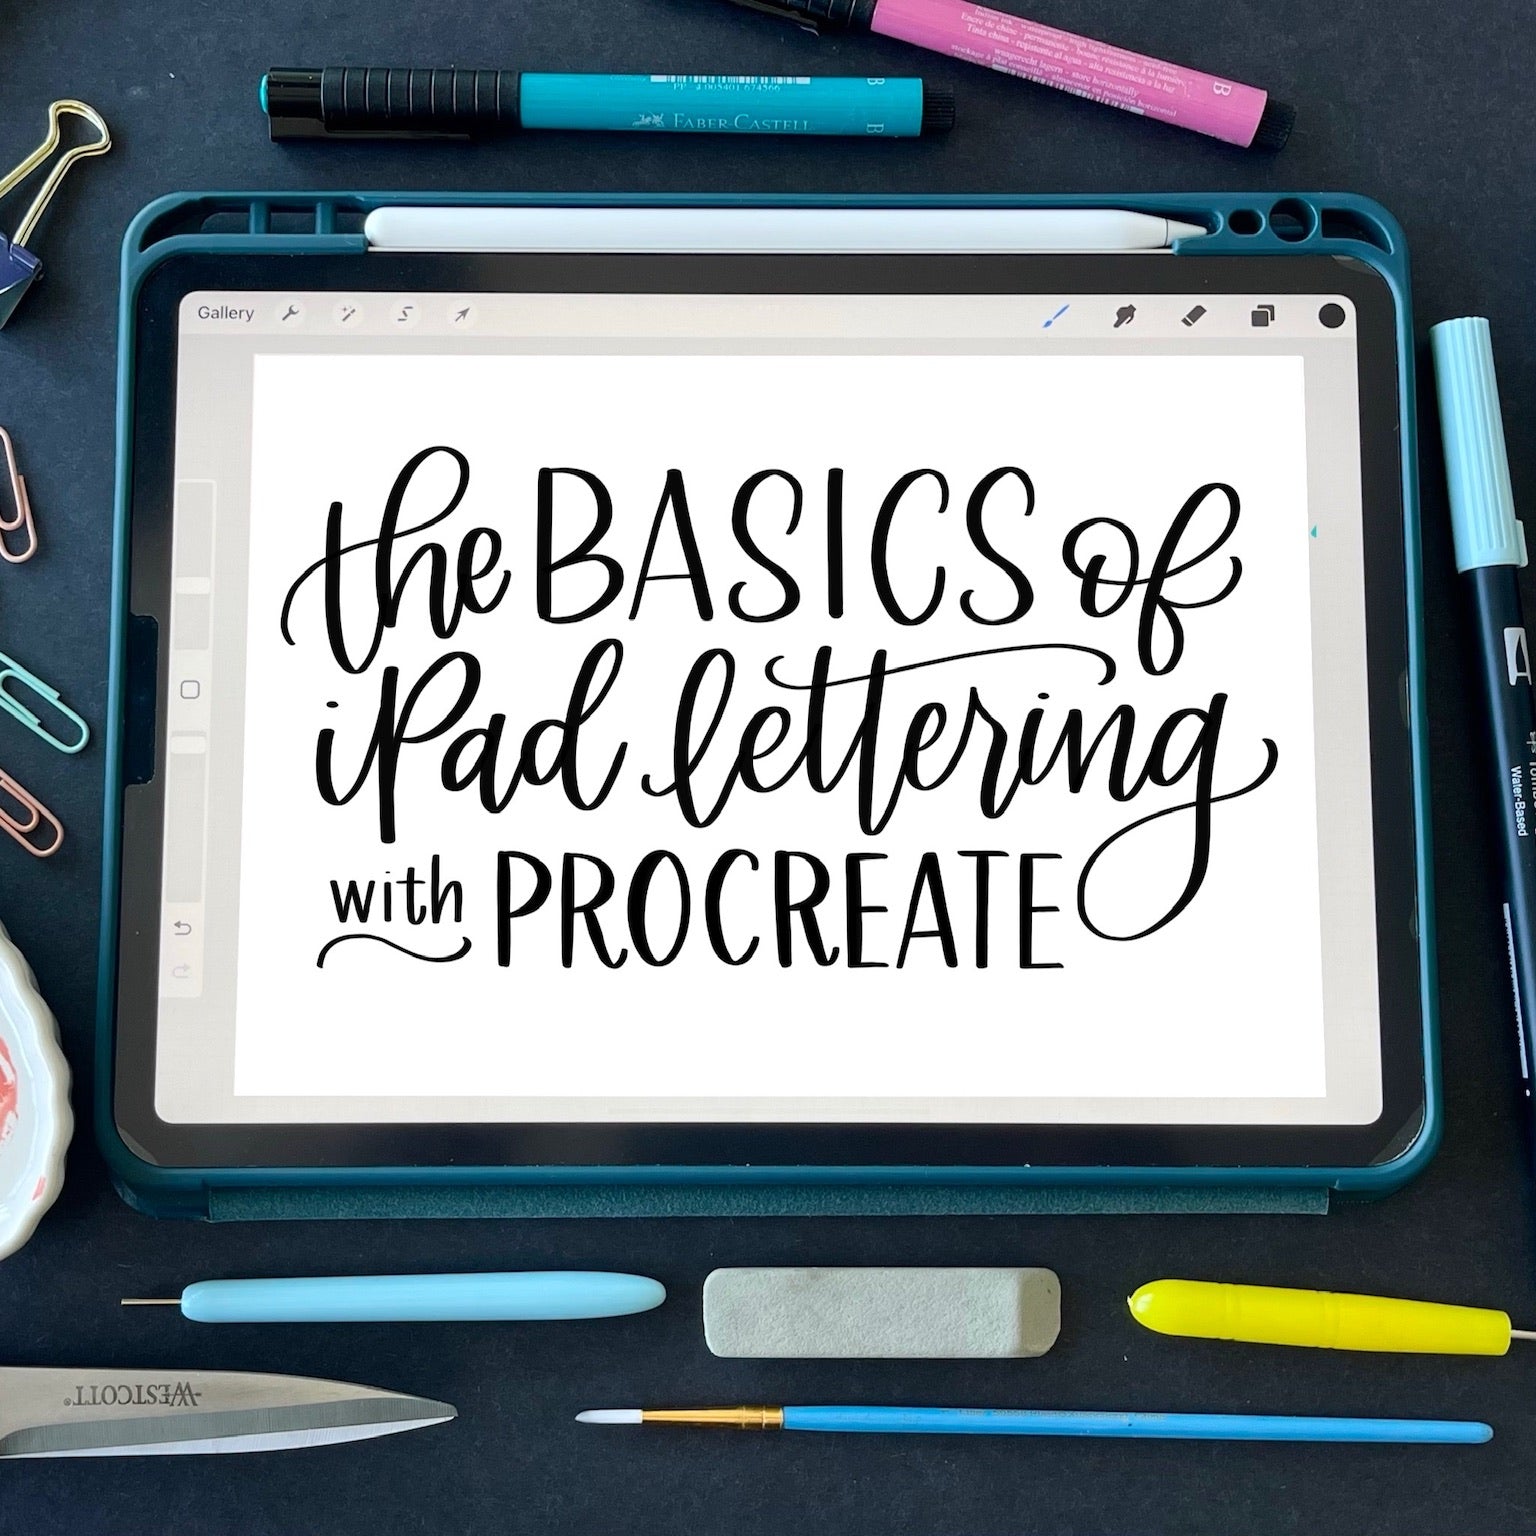 iPad Lettering in Procreate for Beginners – Hand Lettered Design